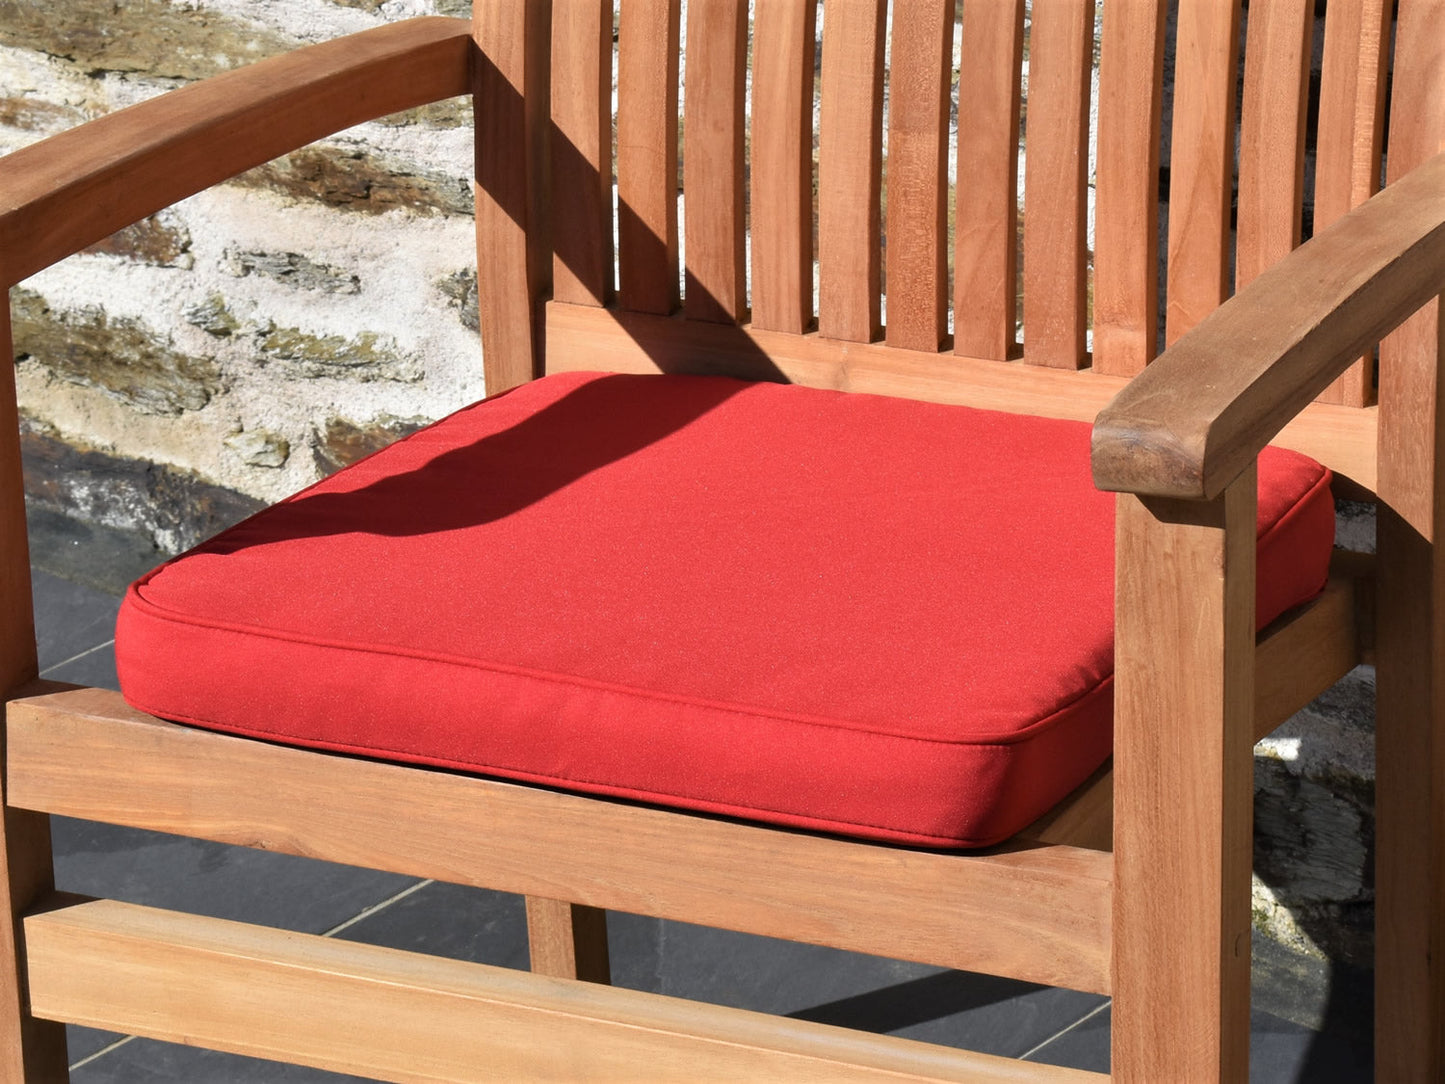 Large outdoor garden seat pad Red, close view